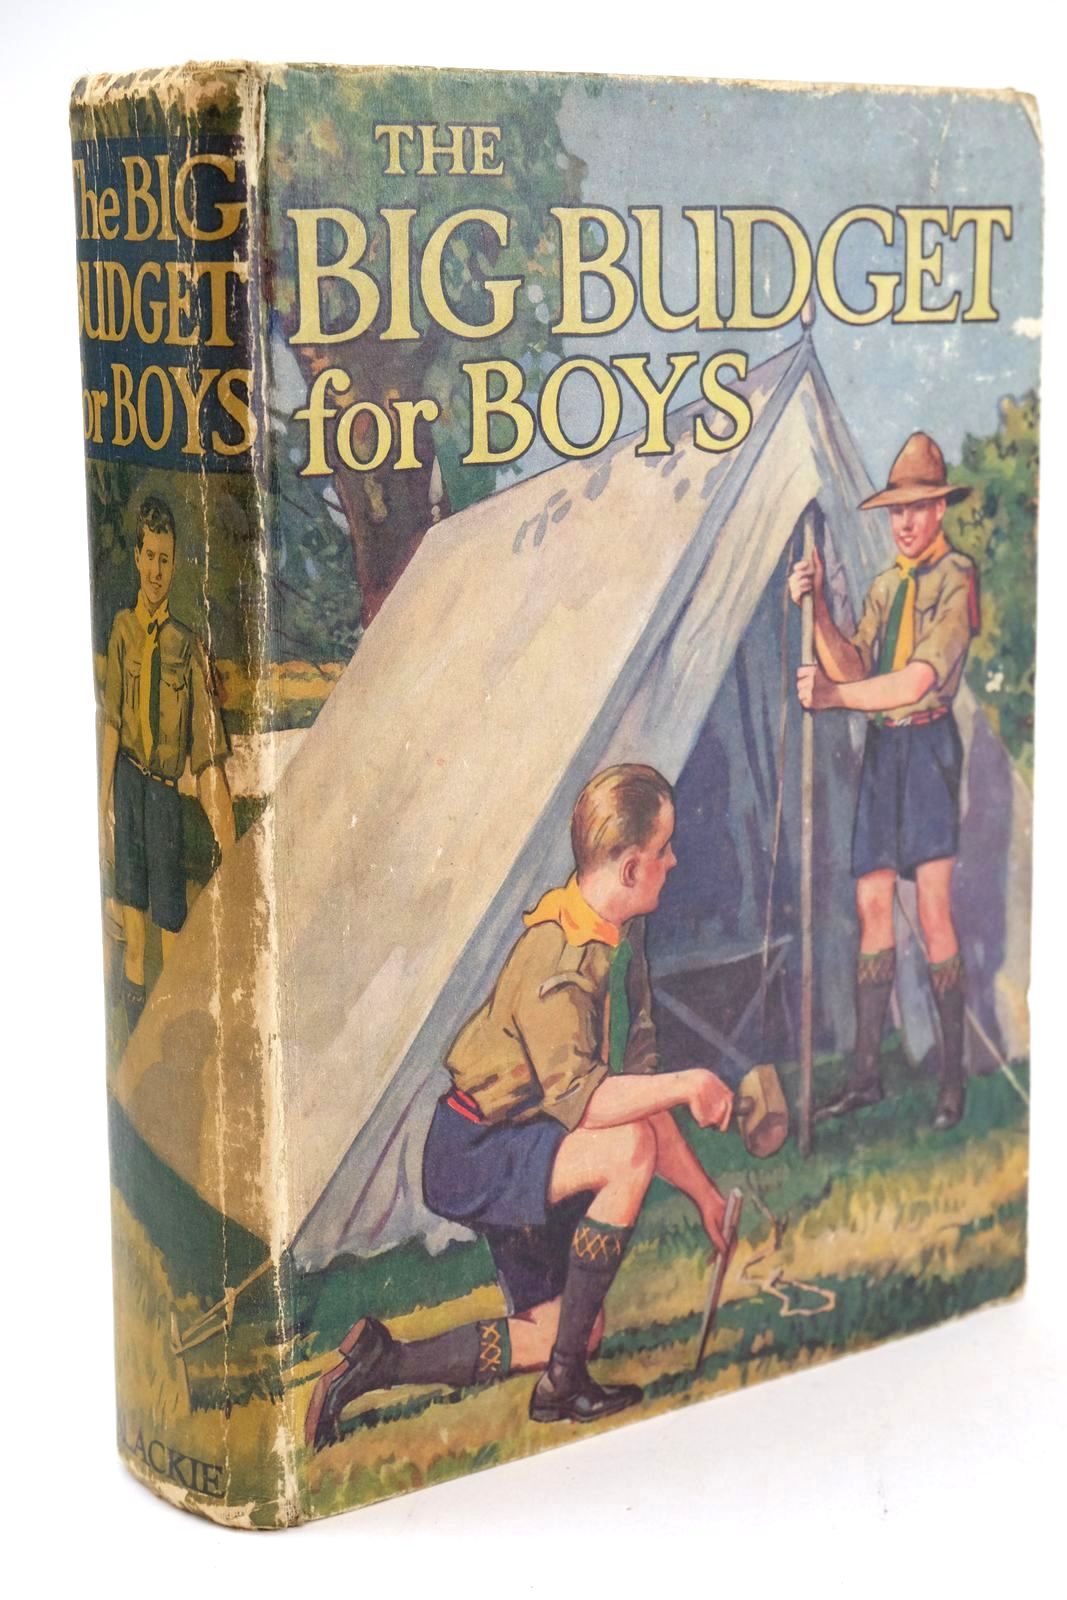 Photo of THE BIG BUDGET FOR BOYS written by Bridges, T.C. Westerman, Percy F. Dickie, Francis et al, illustrated by Eyles, D.C. Day, G.R. et al., published by Blackie &amp; Son Ltd. (STOCK CODE: 1325136)  for sale by Stella & Rose's Books